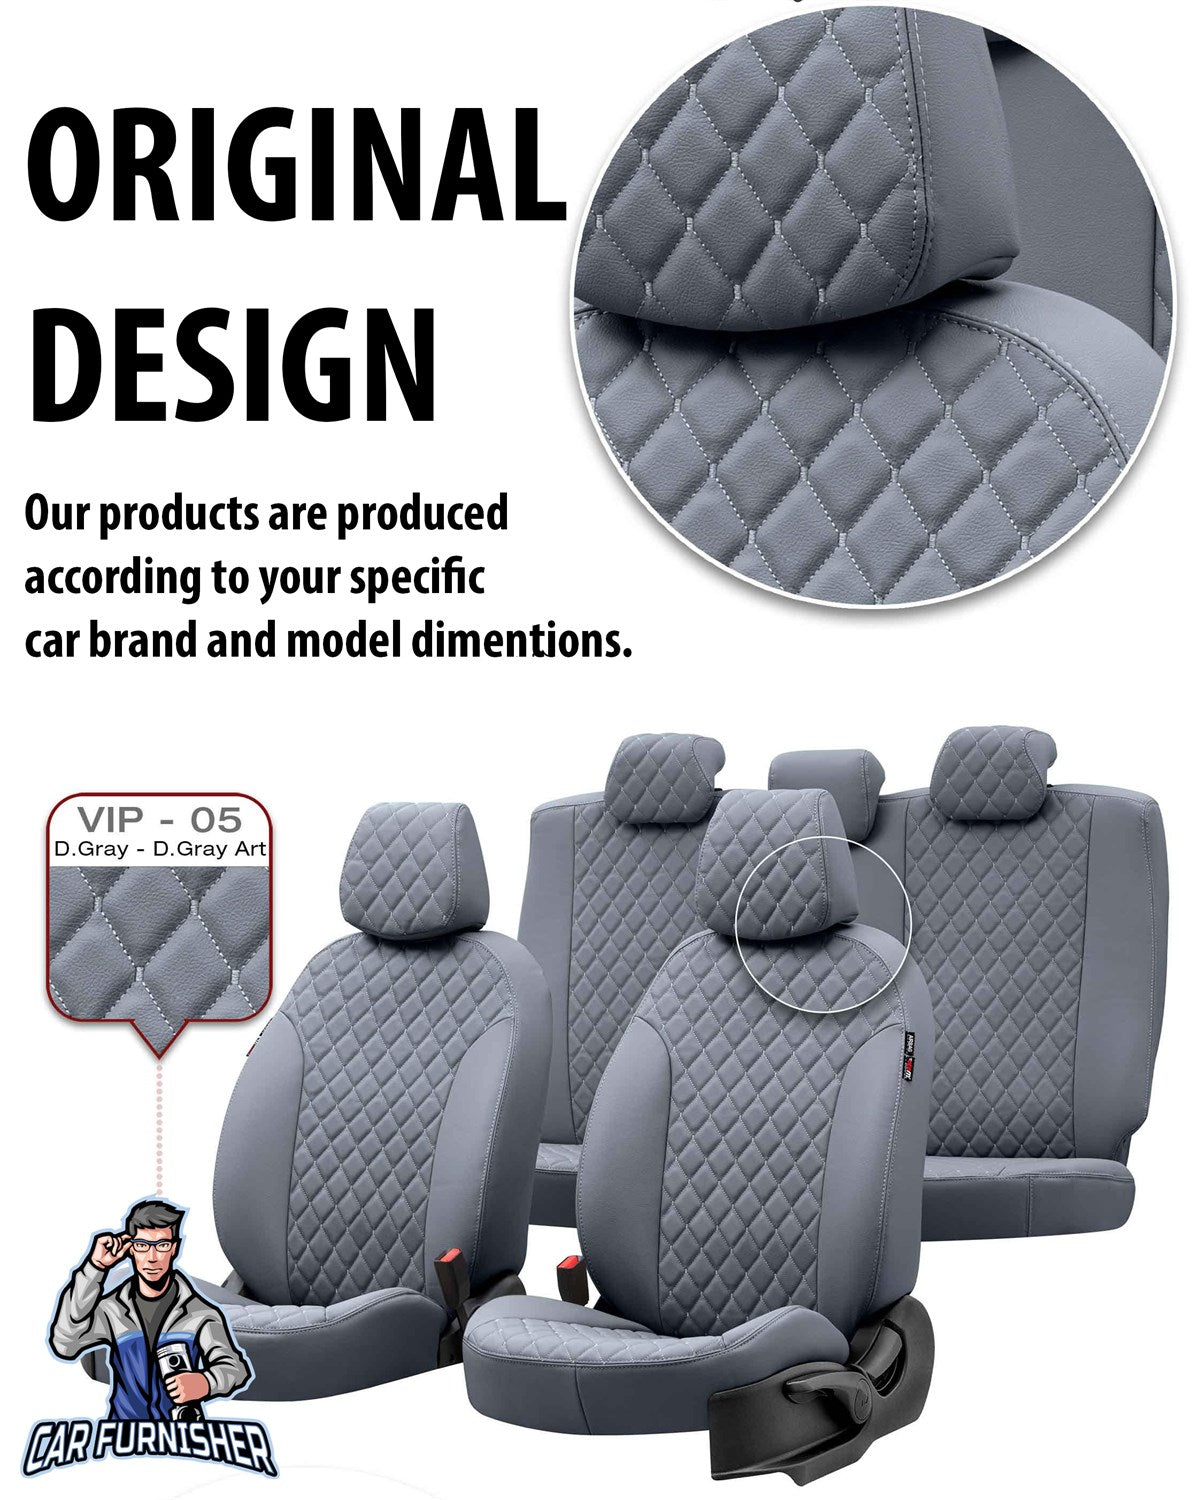 Honda HRV Seat Covers Madrid Leather Design Beige Leather